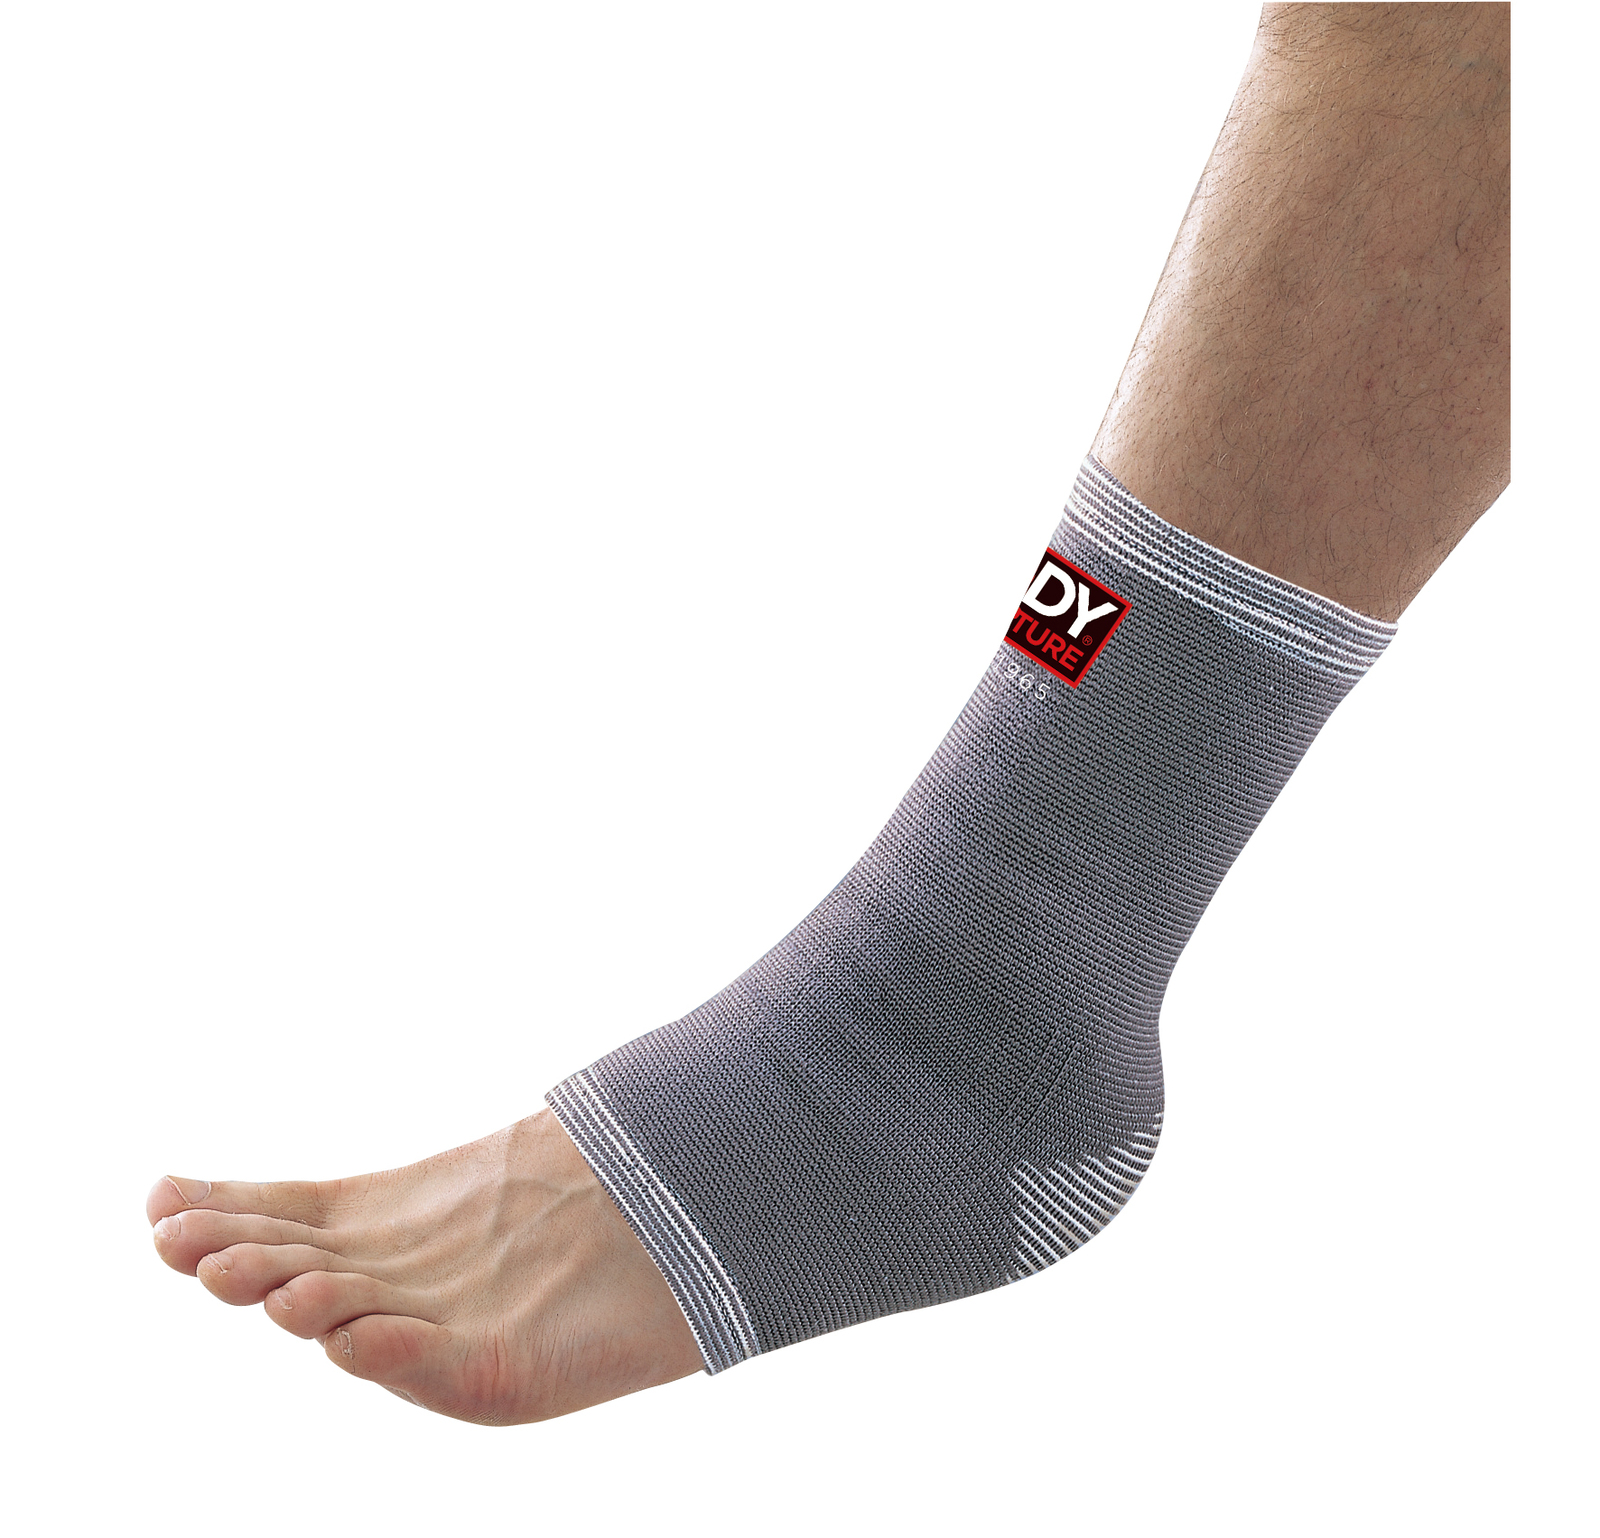 Body Sculpture Elastic Ankle Support